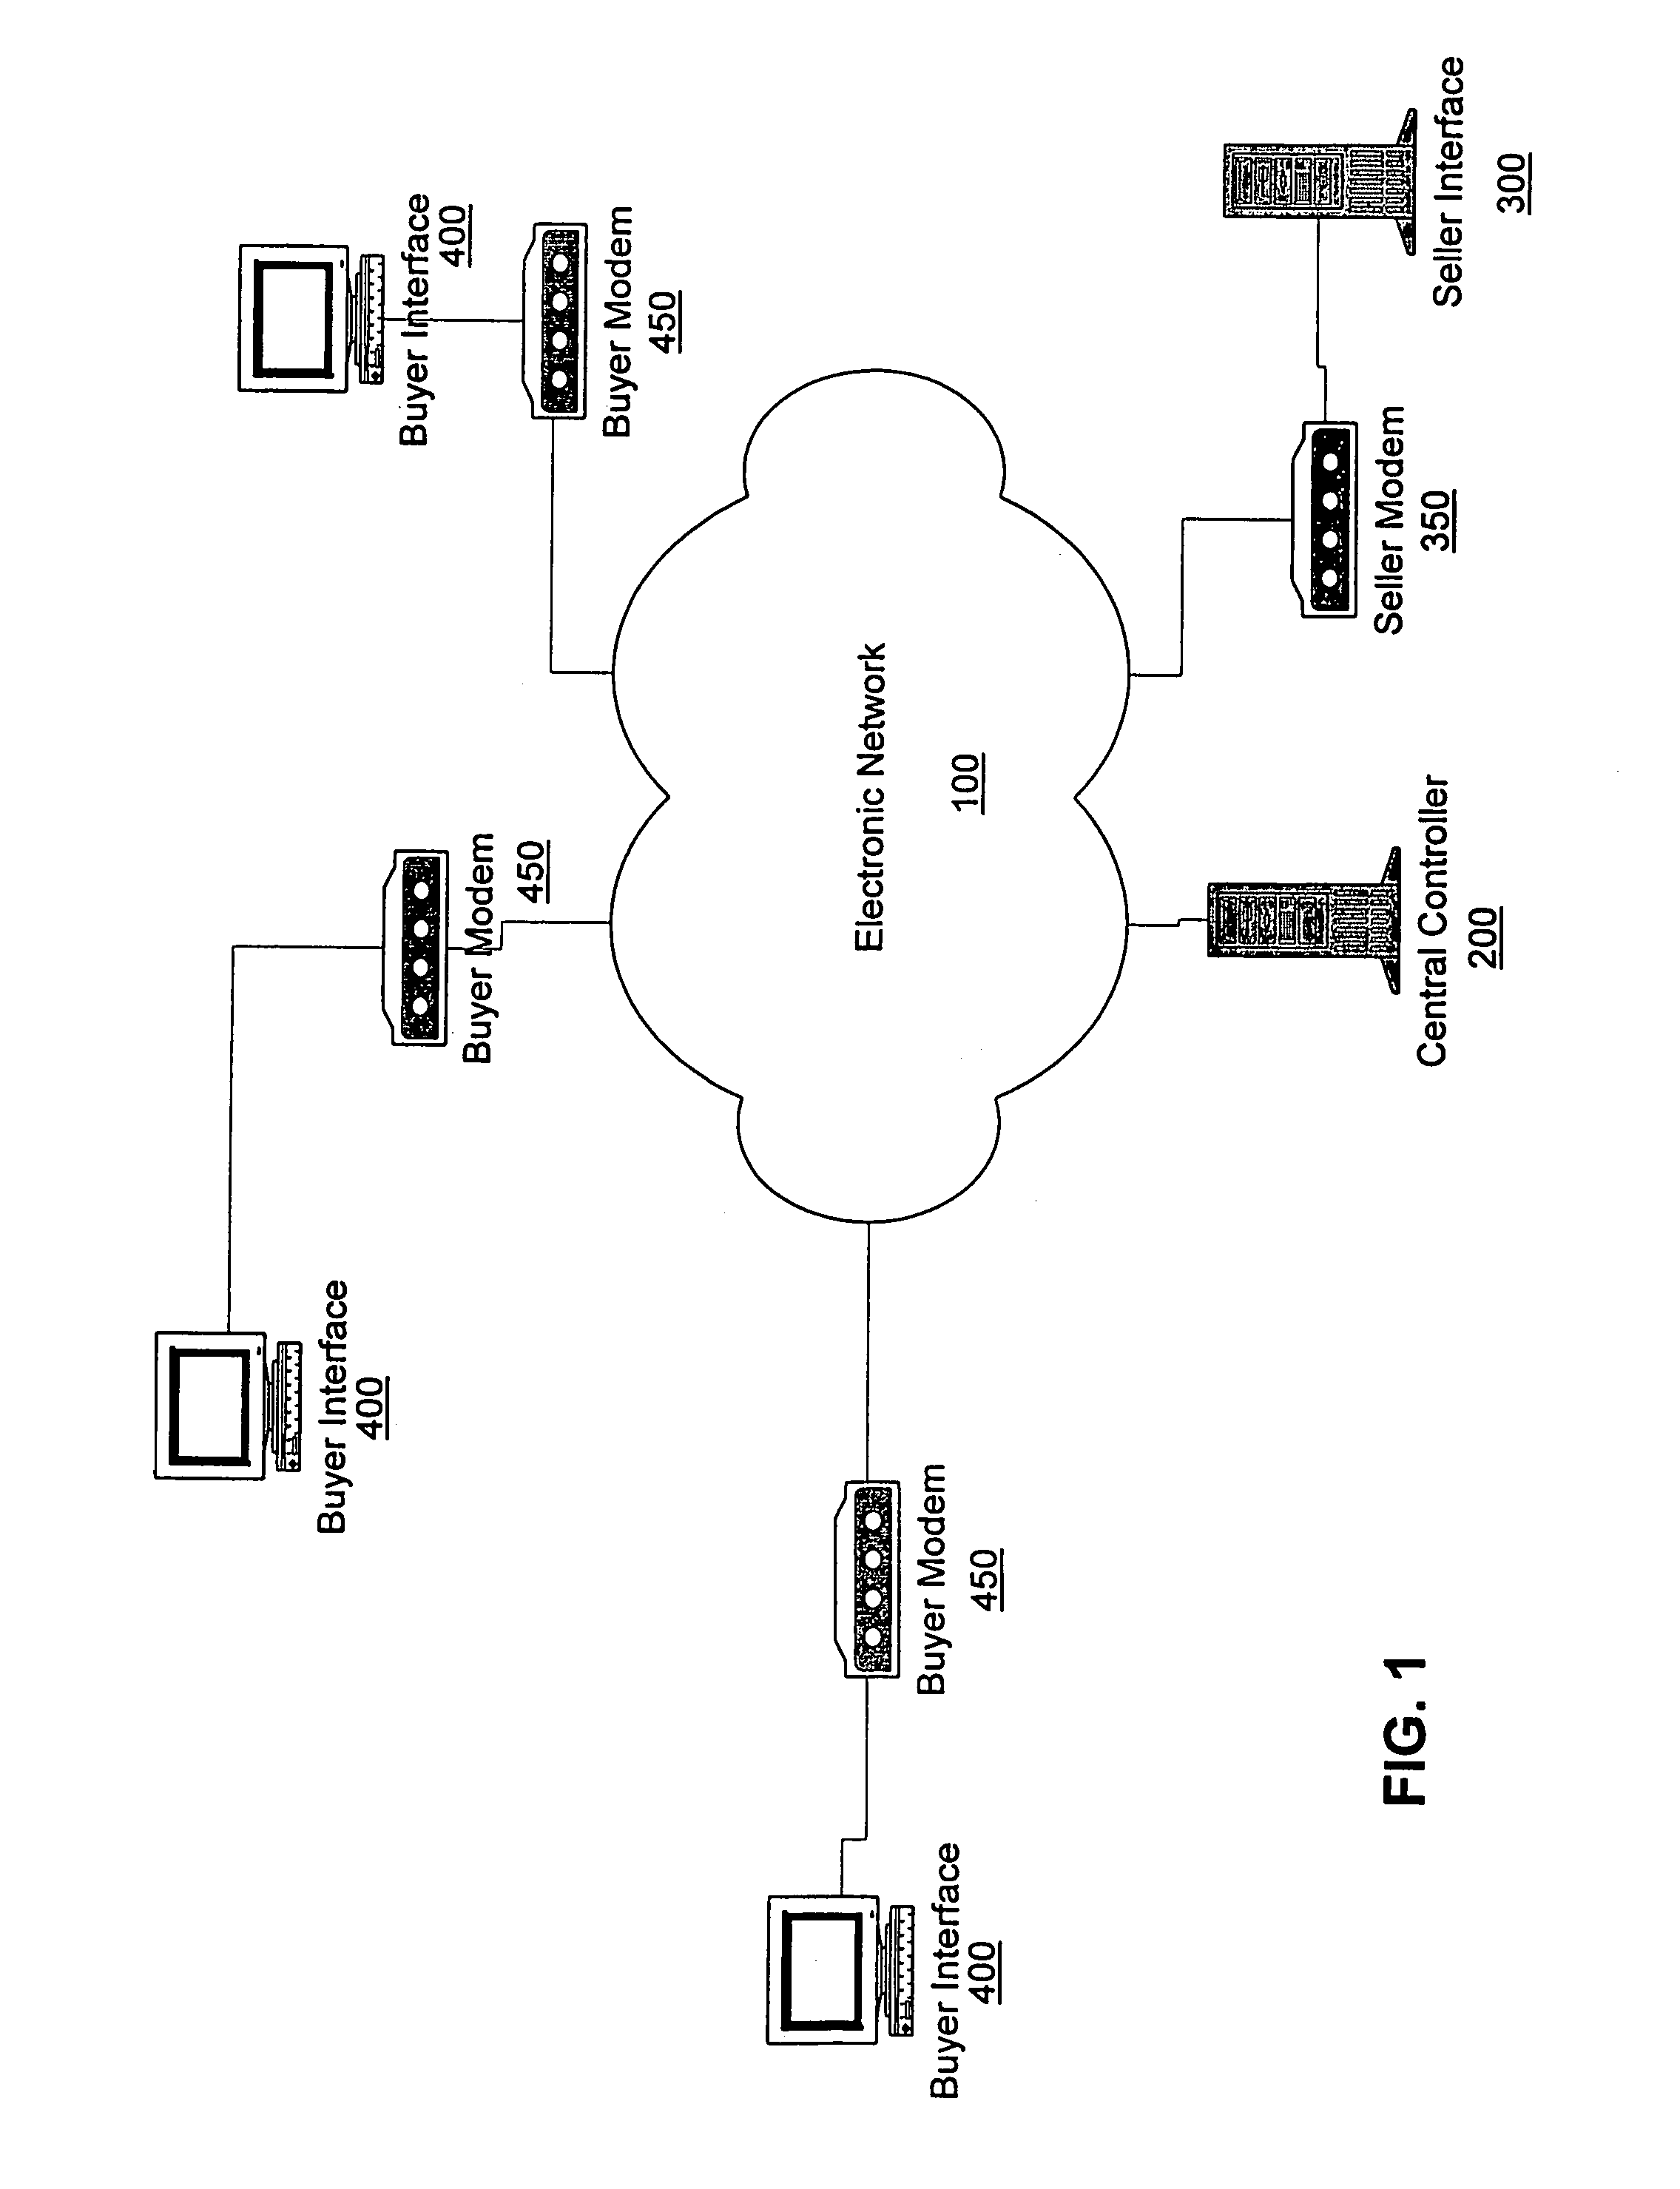 Method and apparatus for generating a sale offer over an electronic network system